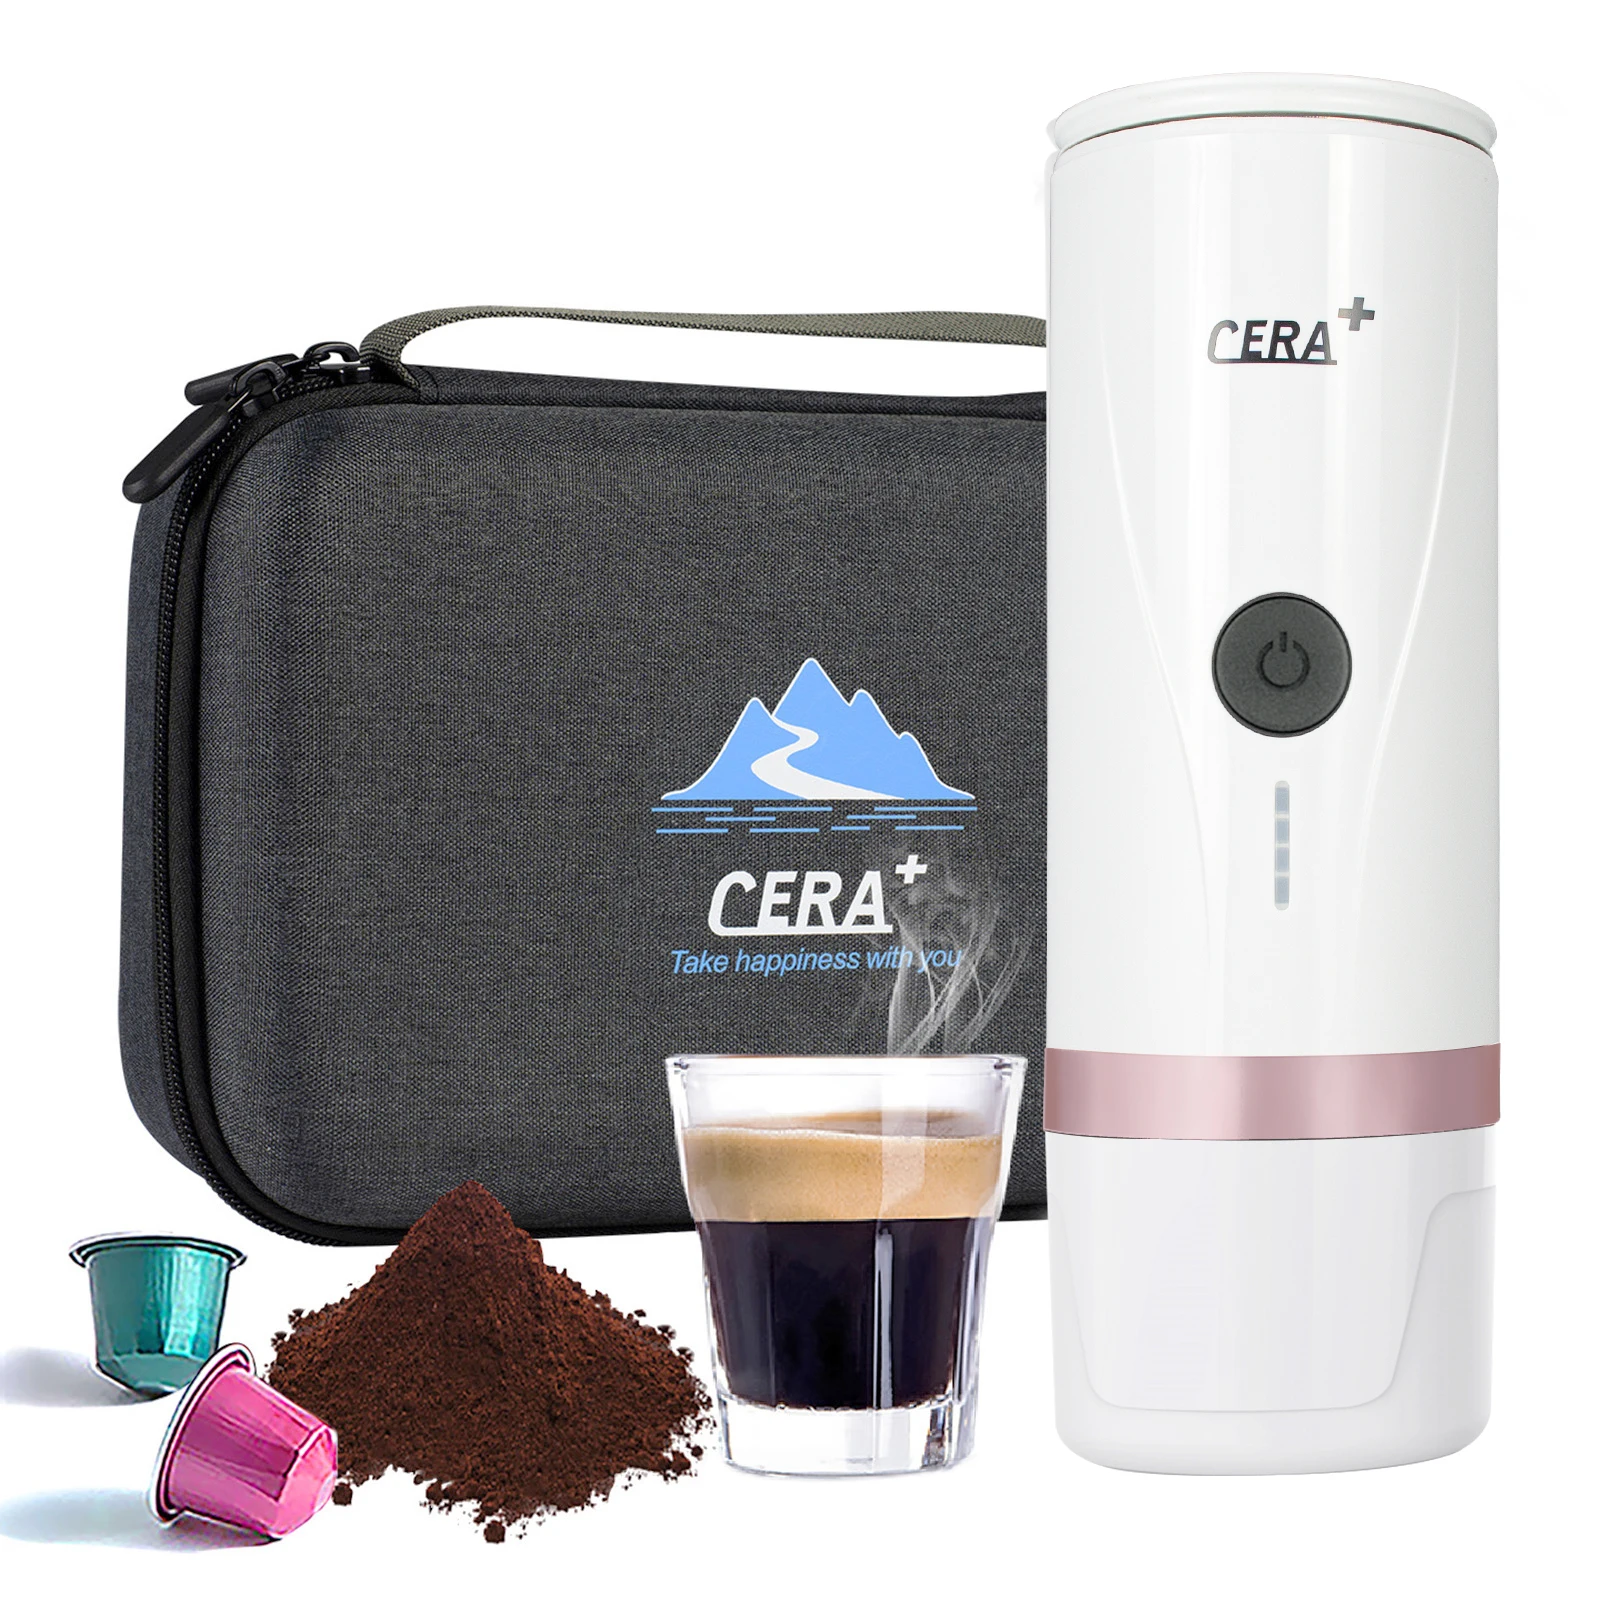 Portable coffee maker PCM00 Extraction by USB – CERA+